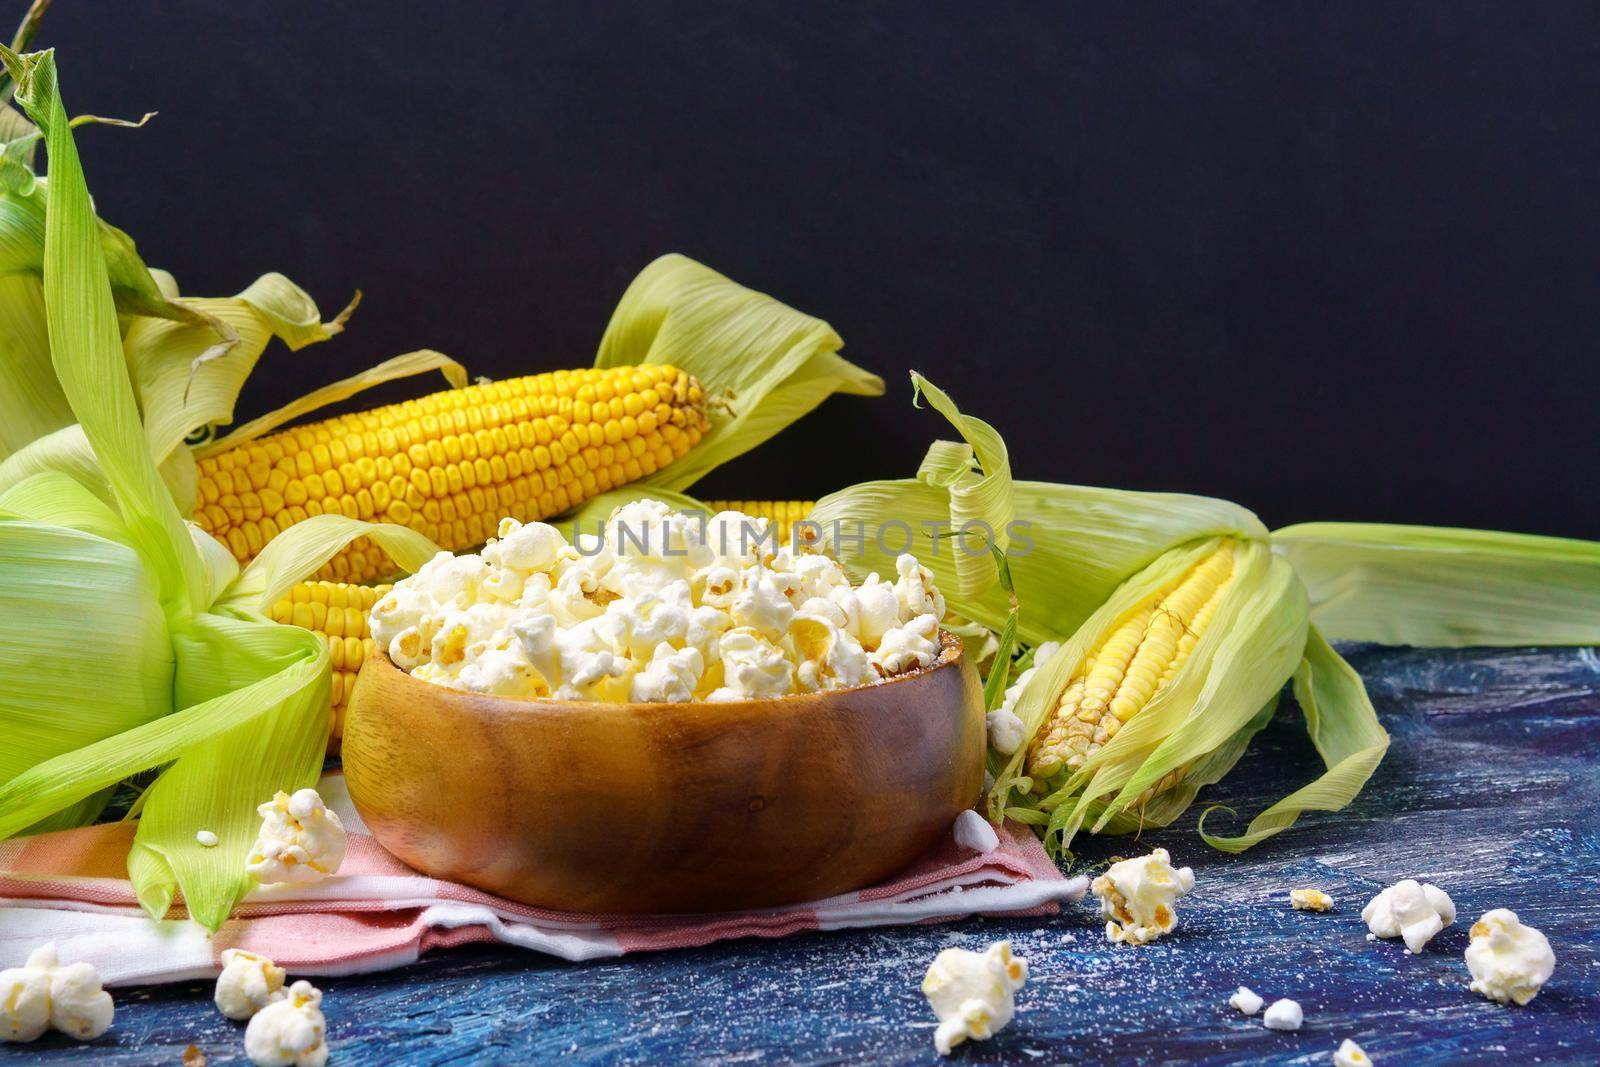 Tasty popcorn in a bowl on the table. Ears of fresh corn on a dark background. Copyspace by darksoul72